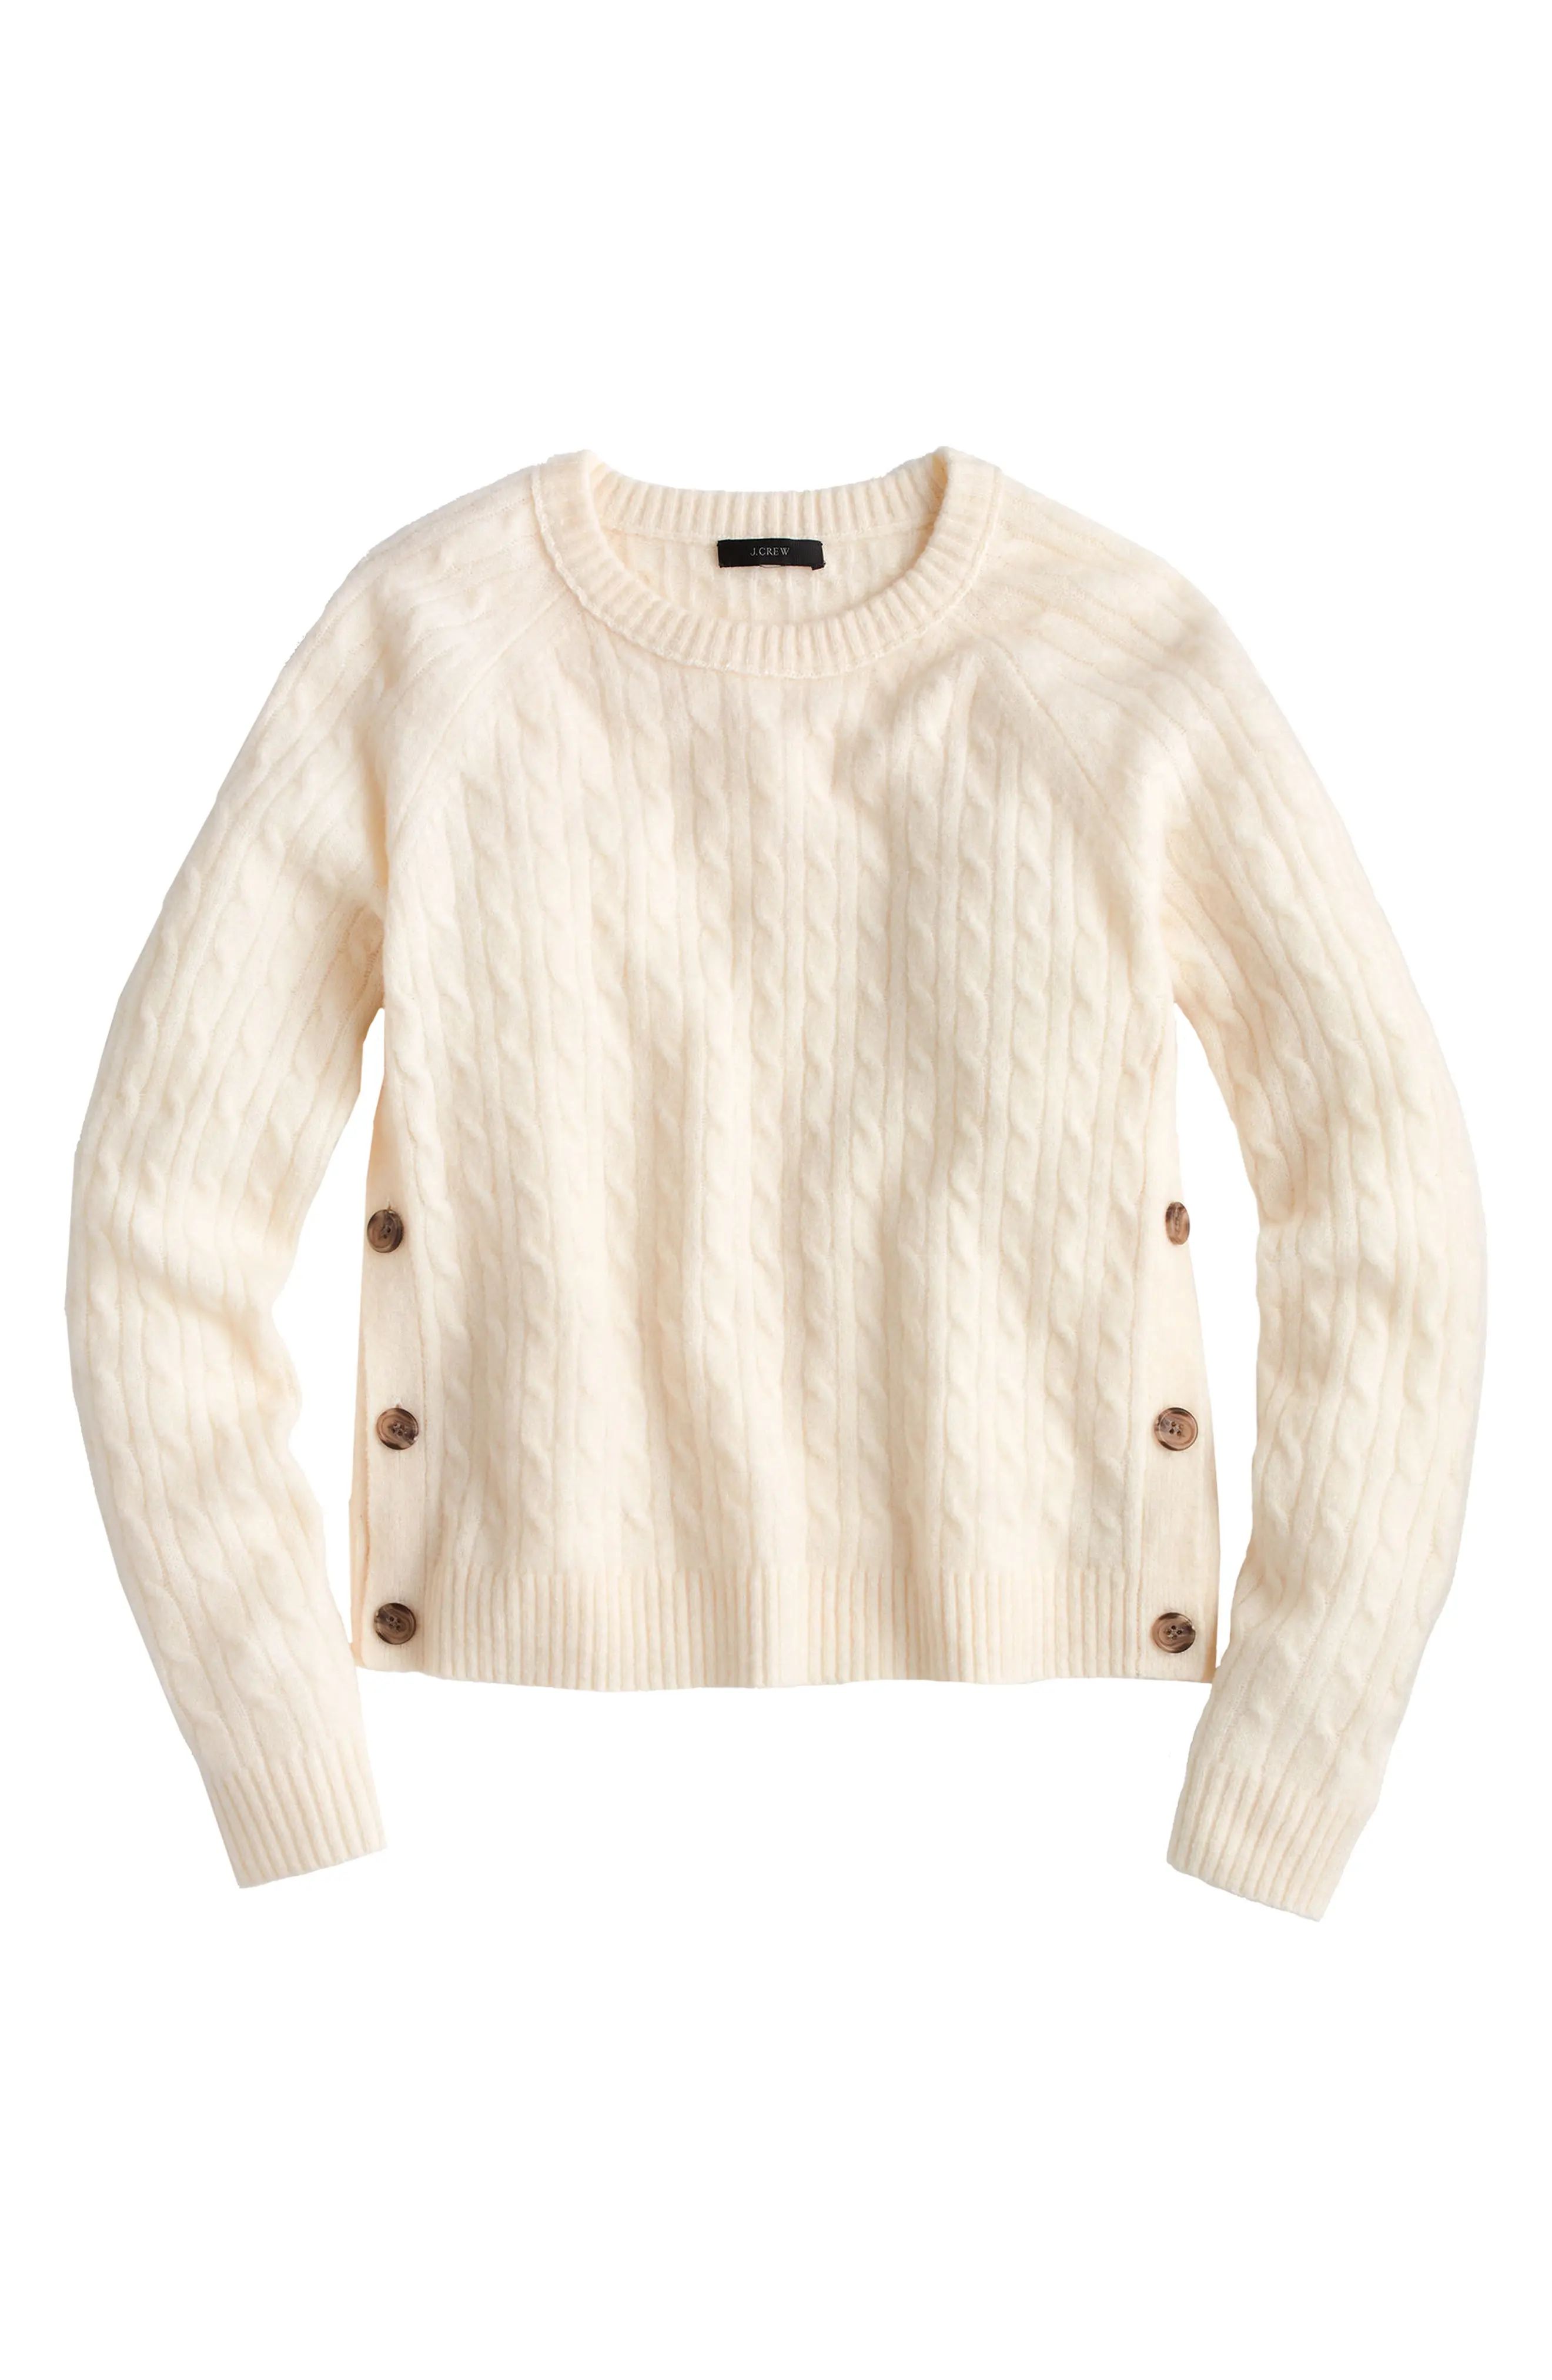 J.Crew Cable Knit Sweater with Buttons | Nordstrom